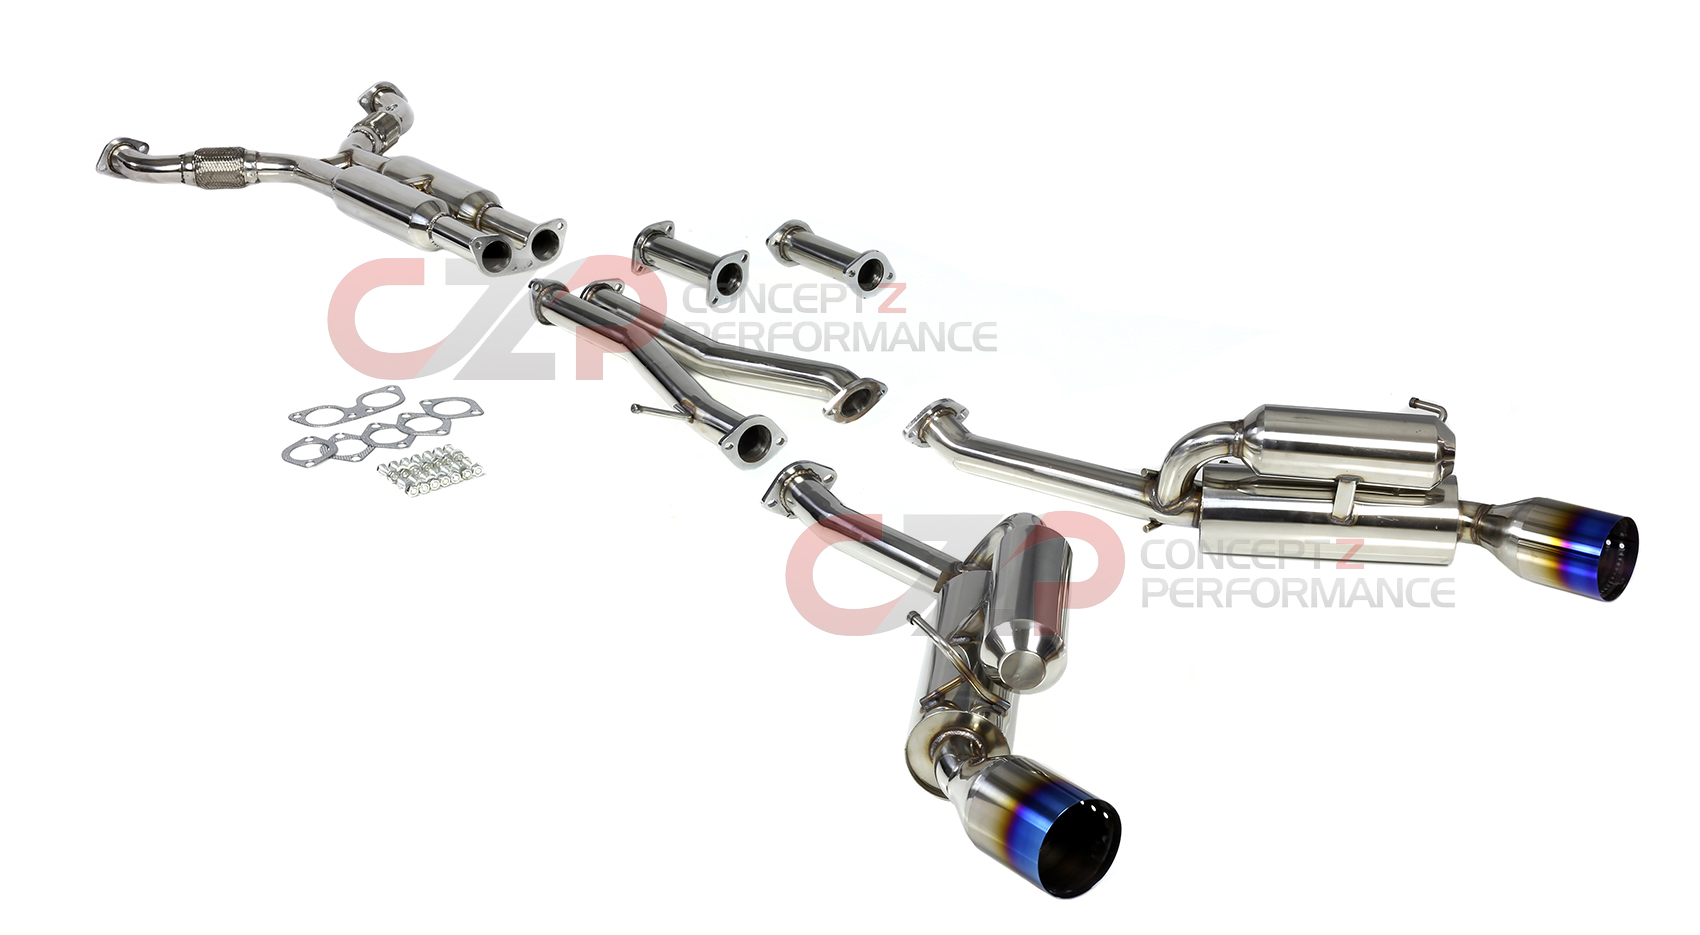 Top Speed Pro-1 True Dual Catback Exhaust System w/ Real Titanium Tip - Nissan 350Z / Infiniti G35 Coupe